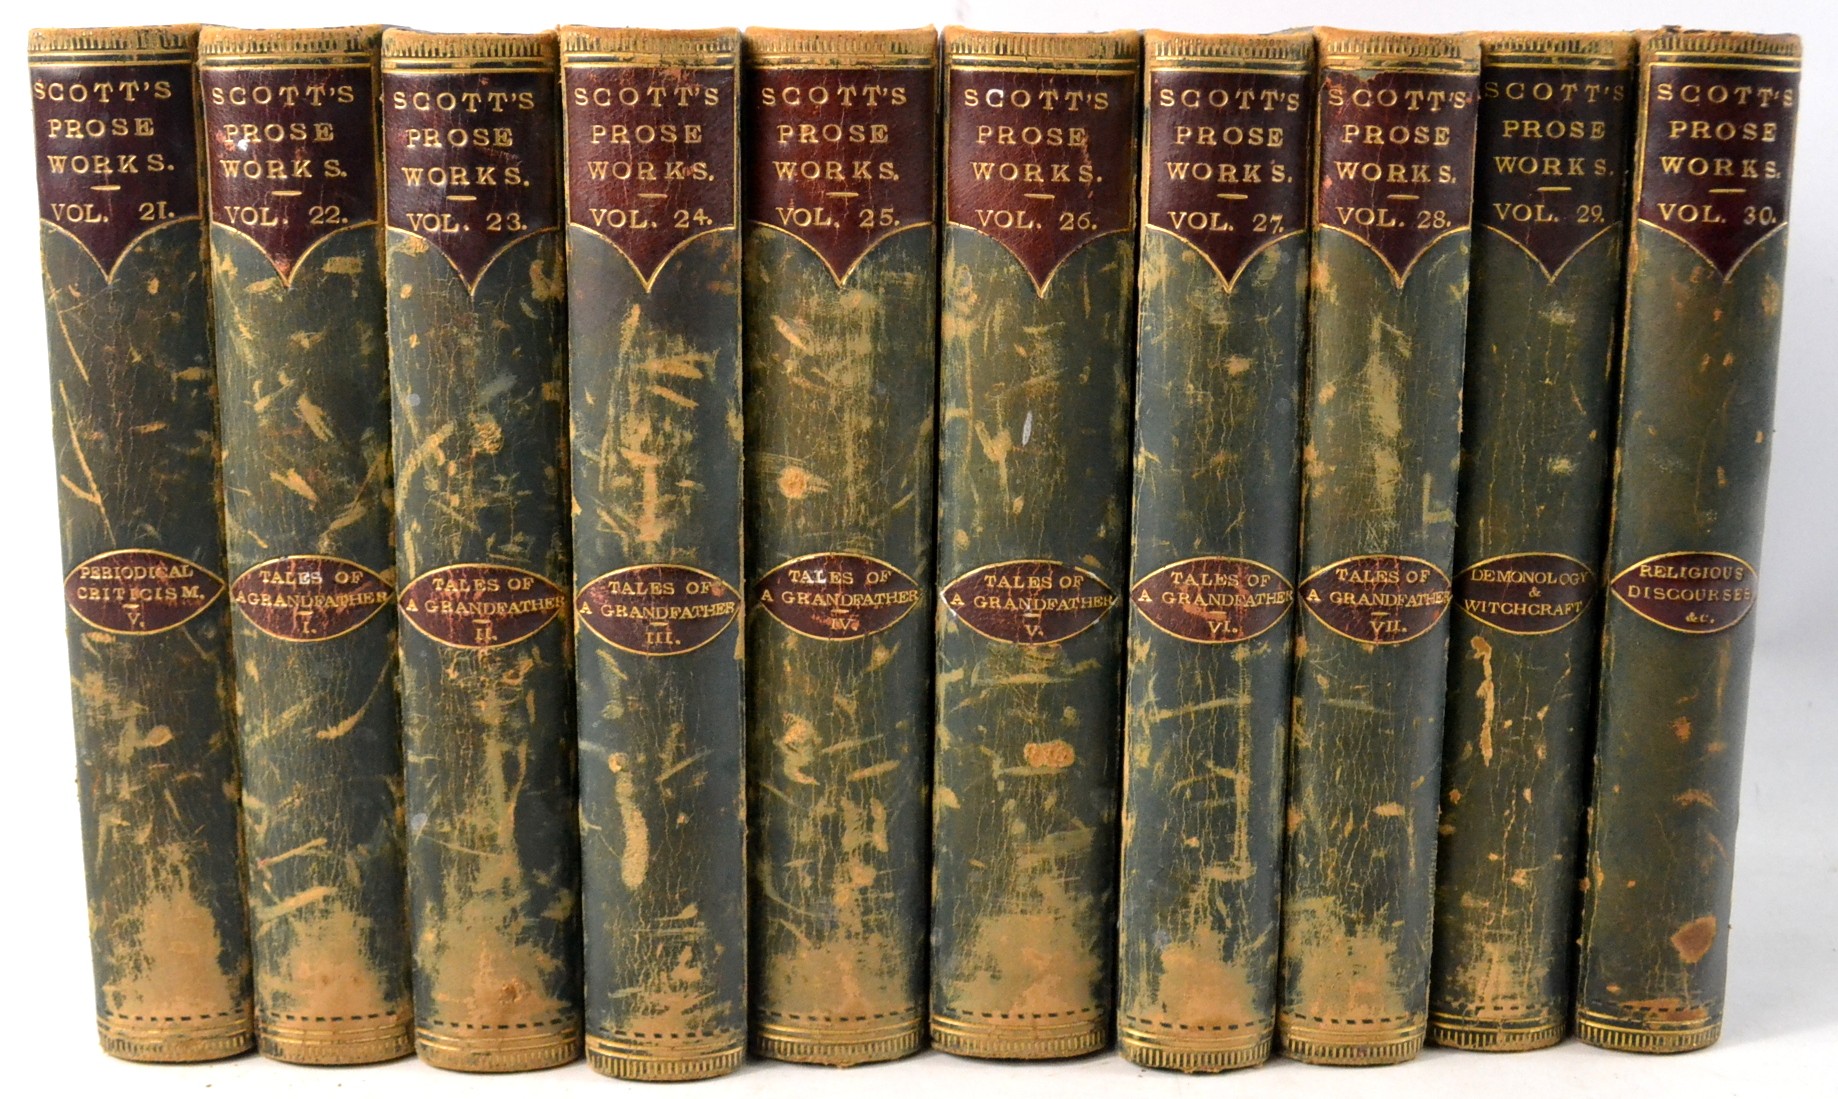 RARE Miscellaneous prose works by Sir Walter Scott (30 volumes) - Image 12 of 13